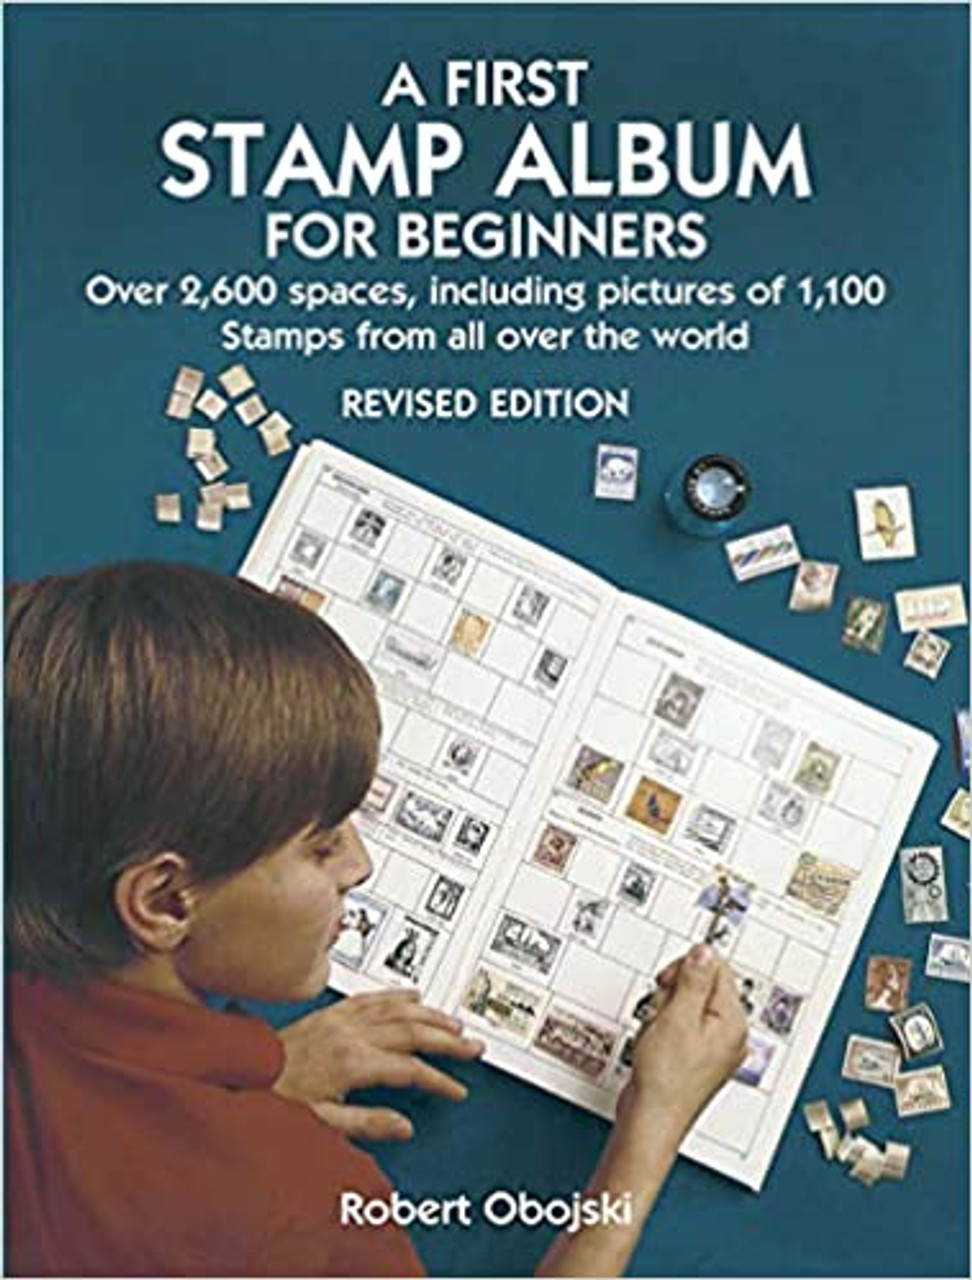 BEGINNER STAMP ALBUM W/100 WORLDWIDE STAMPS- GREAT FOR KIDS OF ALL